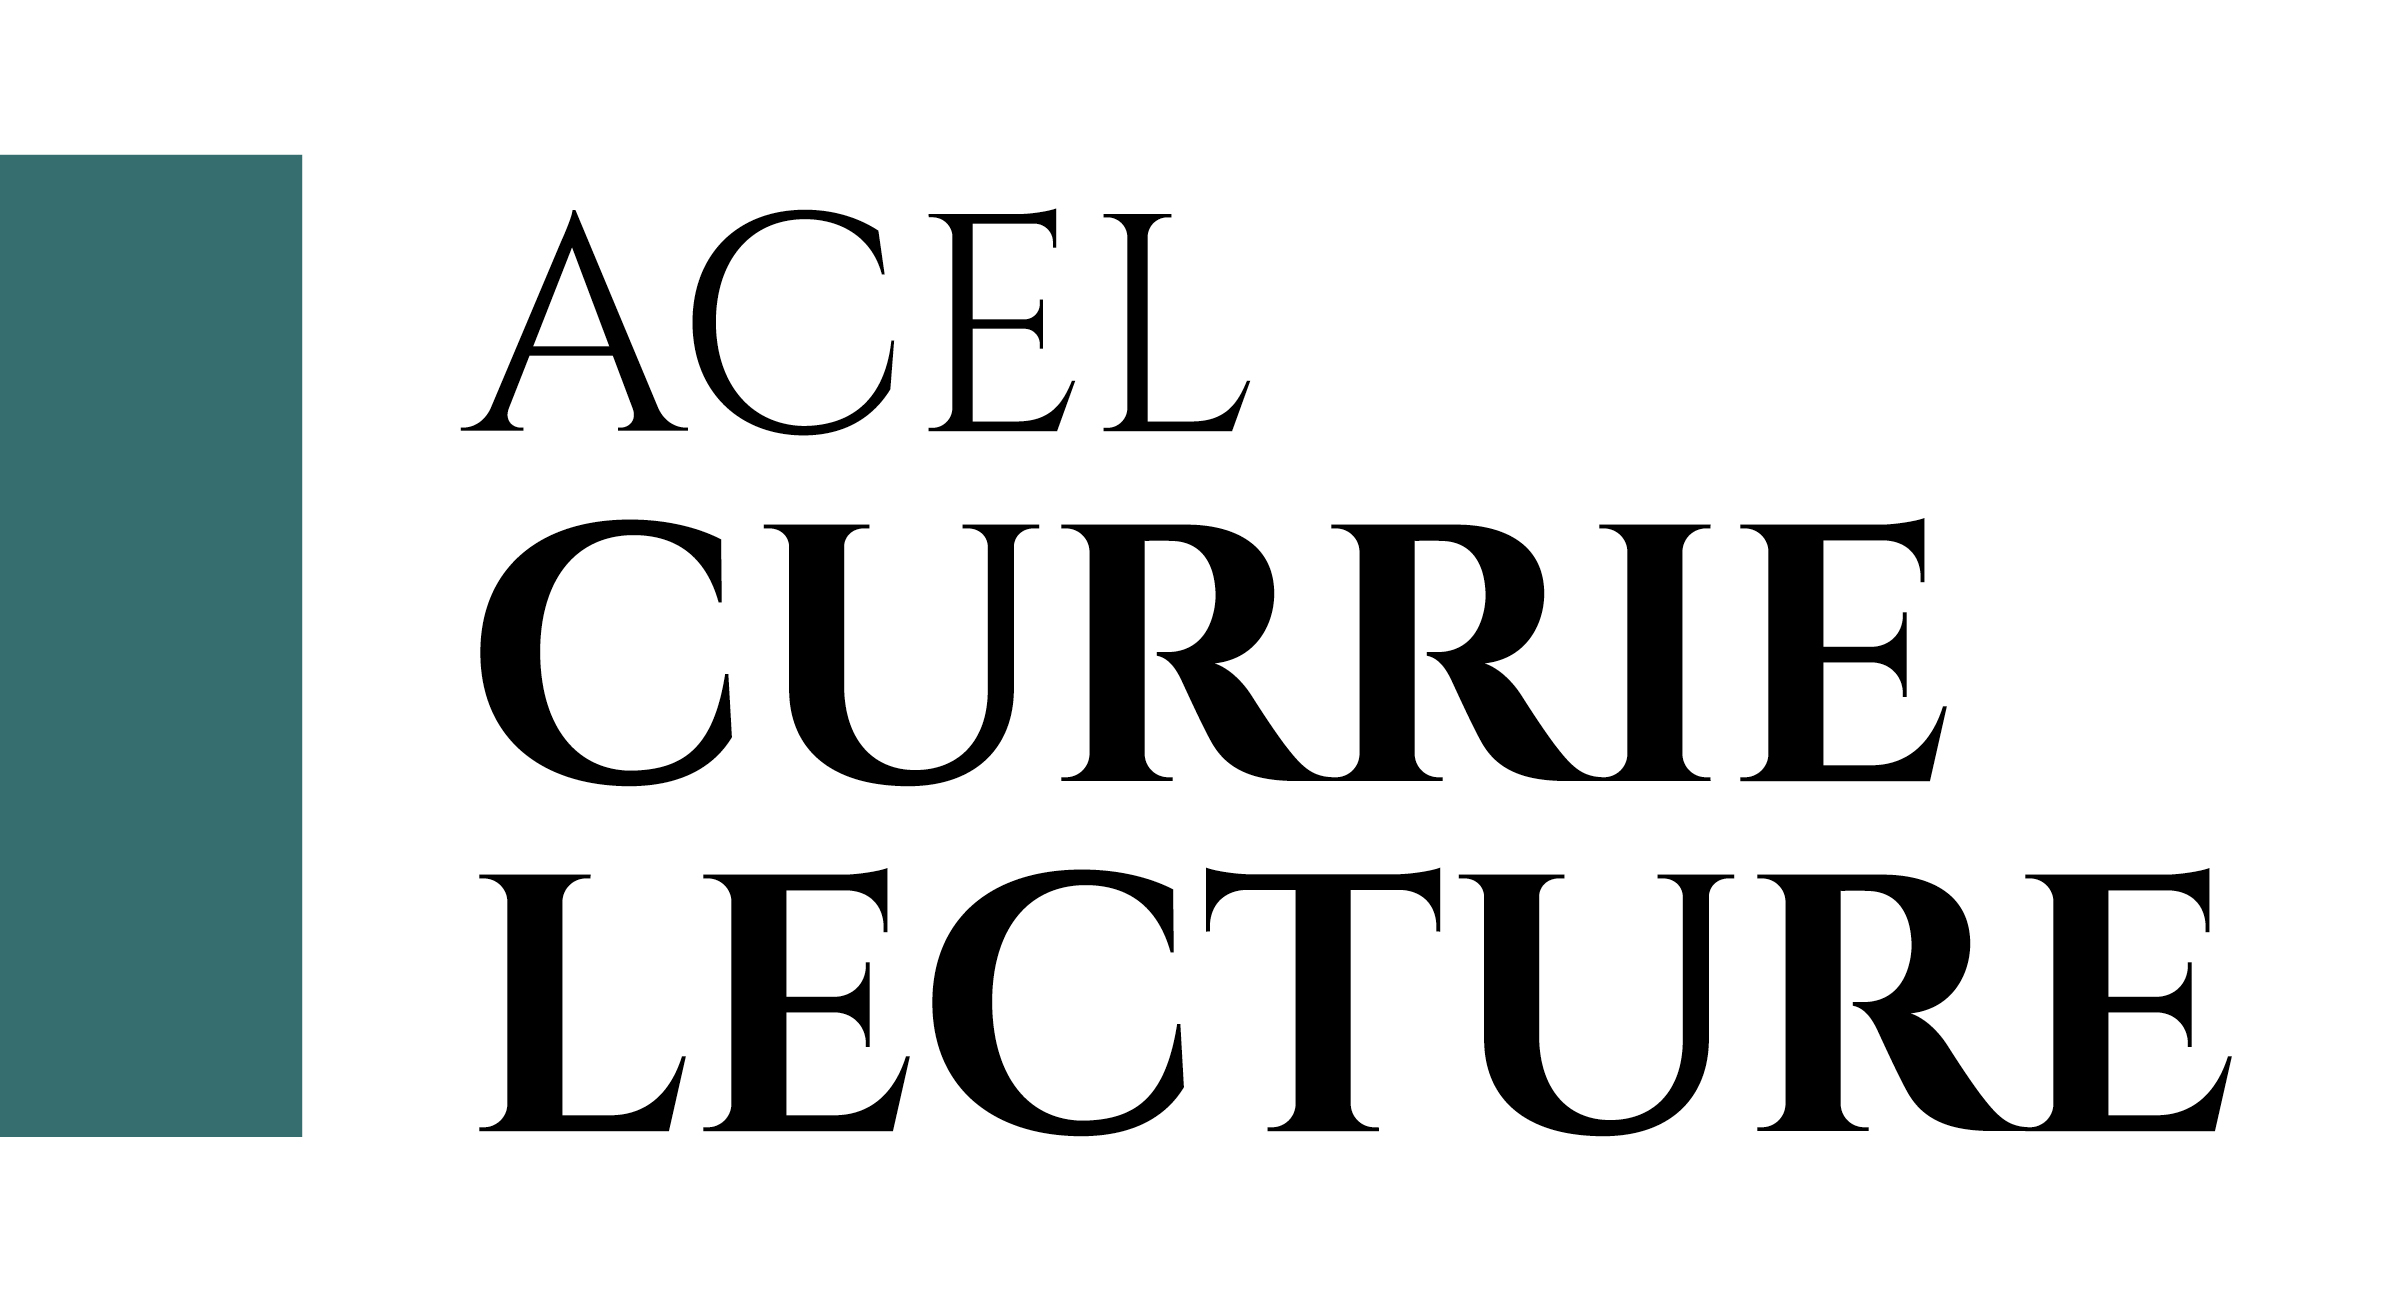 ACT Currie Lecture